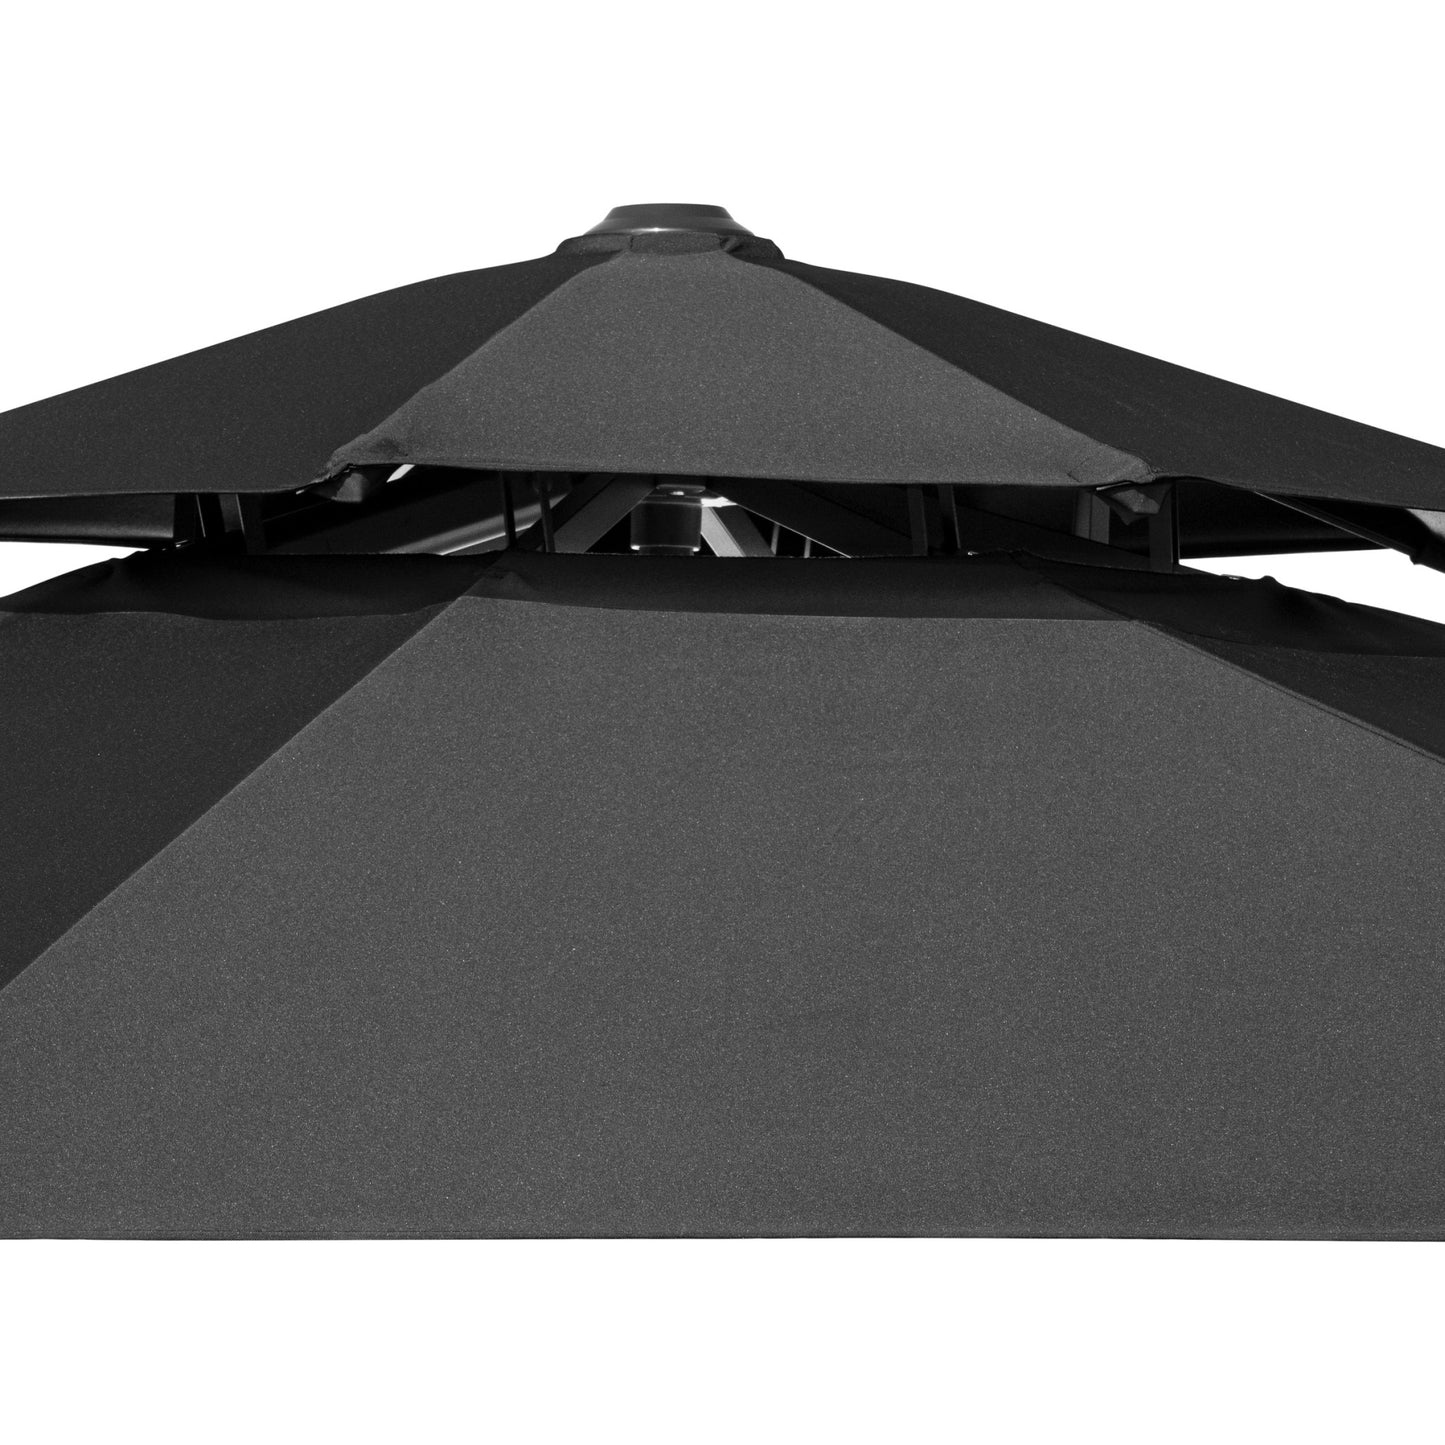 12' Black Polyester Round Tilt Cantilever Patio Umbrella With Stand